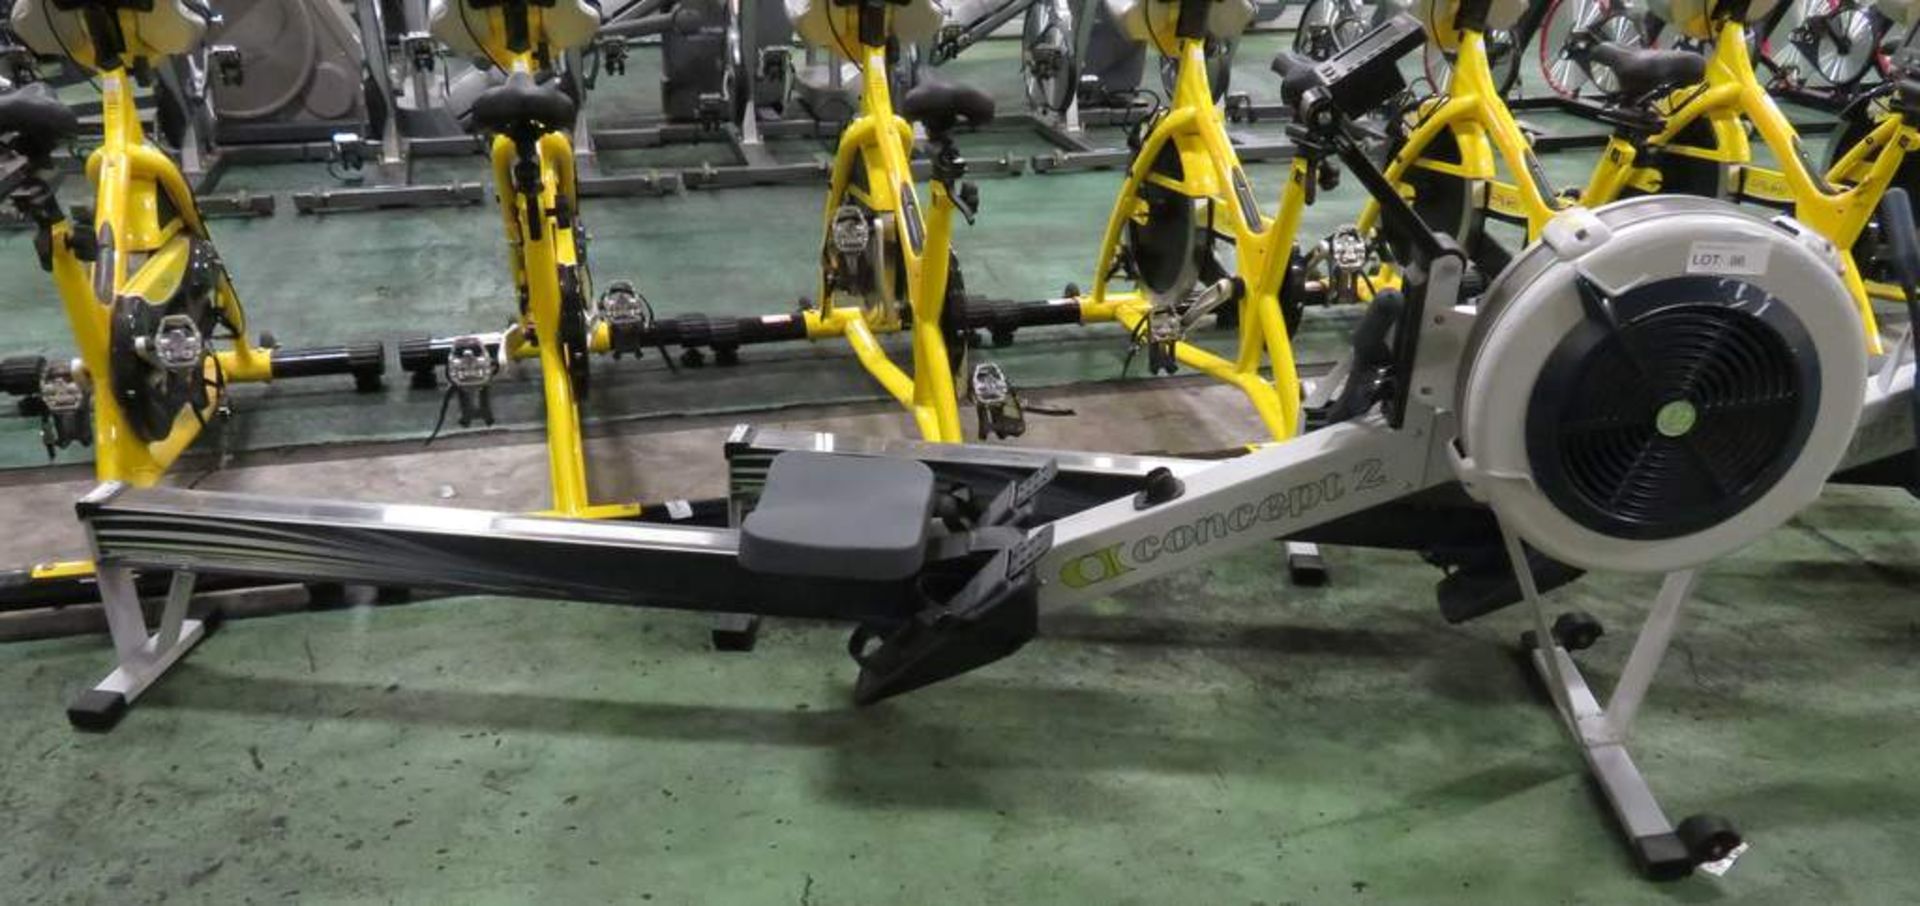 Concept 2 Indoor Rowing Machine, Model D, Complete With PM5 Display Console (Damaged Screen).